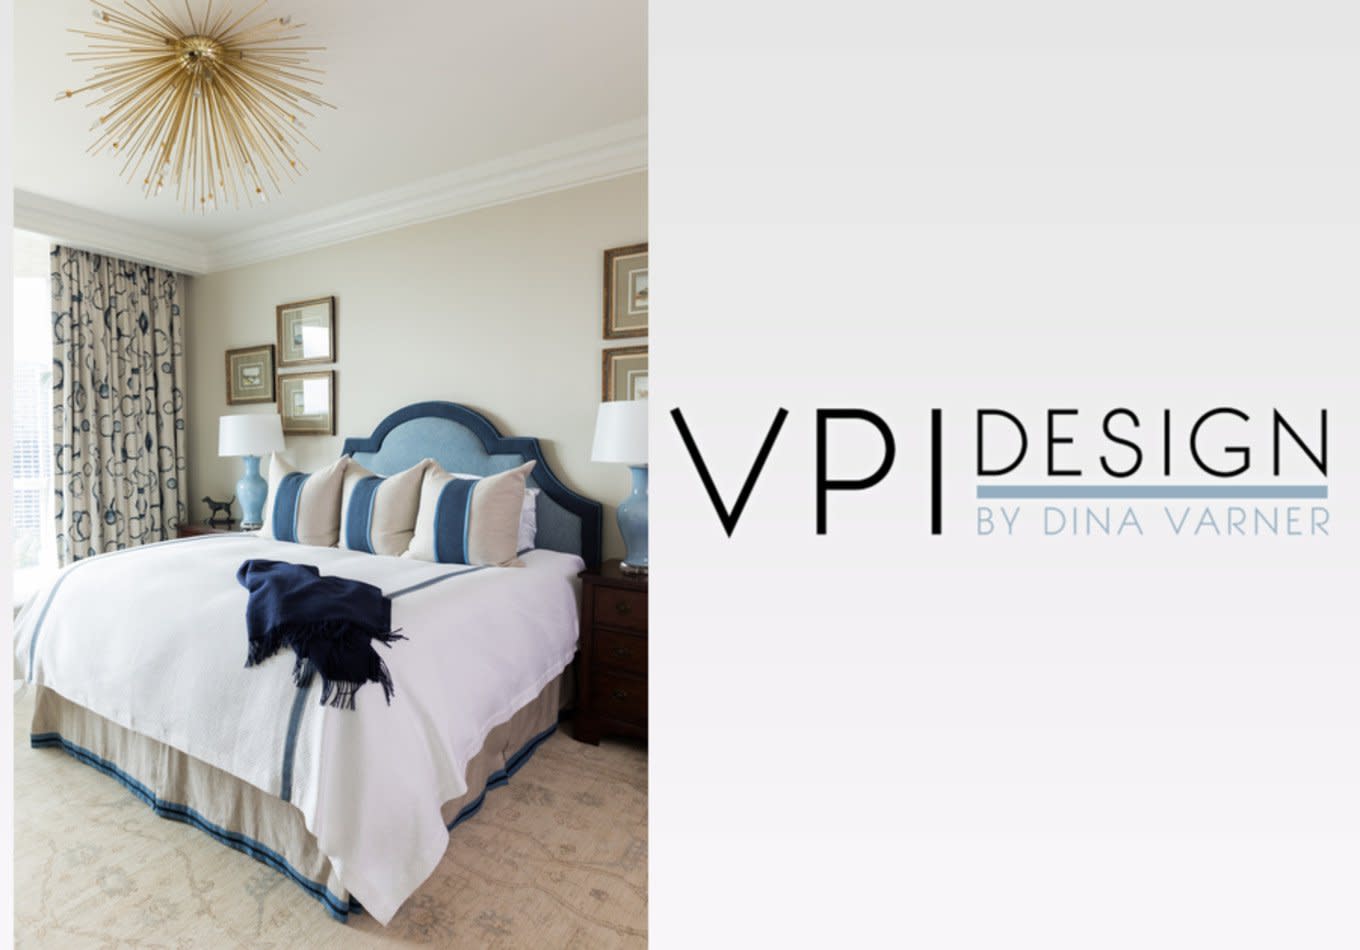 Top Sea Island Luxury Interior Designer, VPI Design, Weighs in on the Impact Linens can have on Bedroom Design - Yahoo Finance